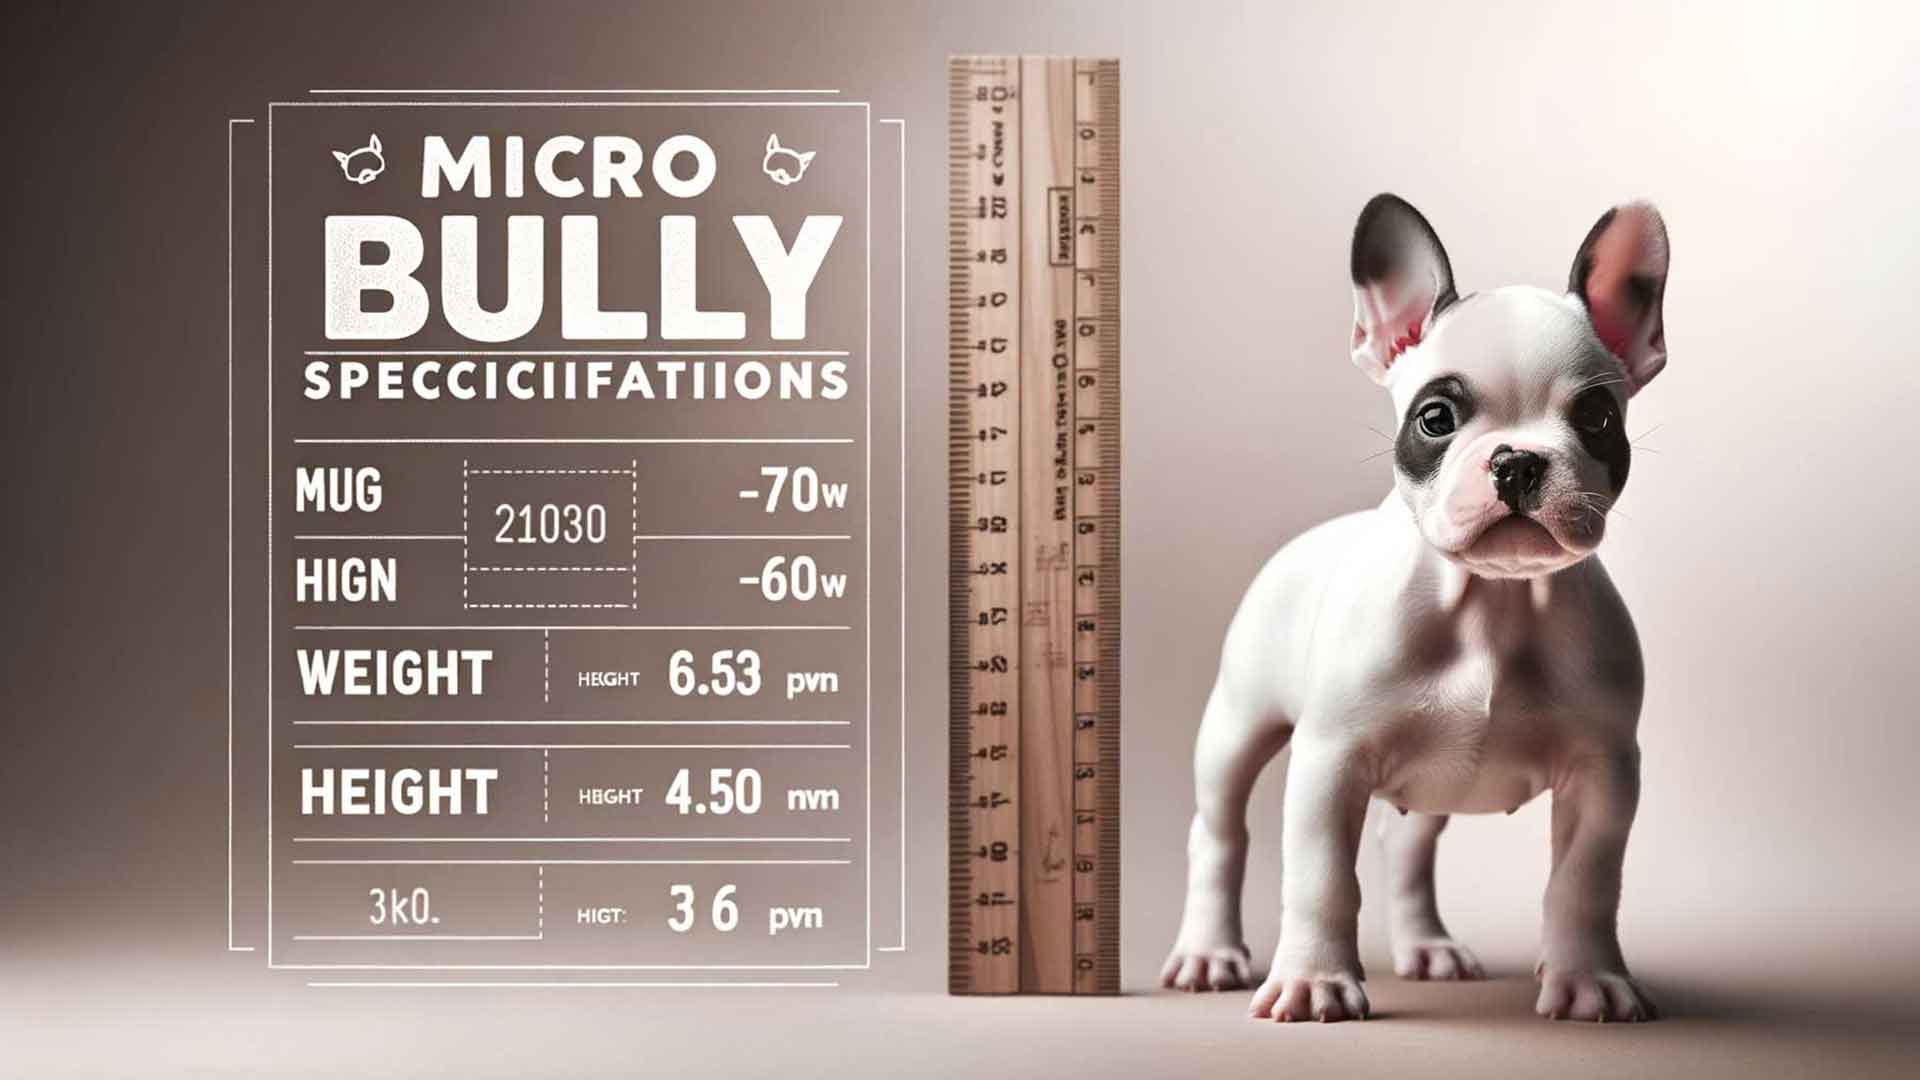 Illustration of a micro bully in side profile, standing next to a ruler that displays its height and size, with annotations in both inches and centimeters against a light blue background.